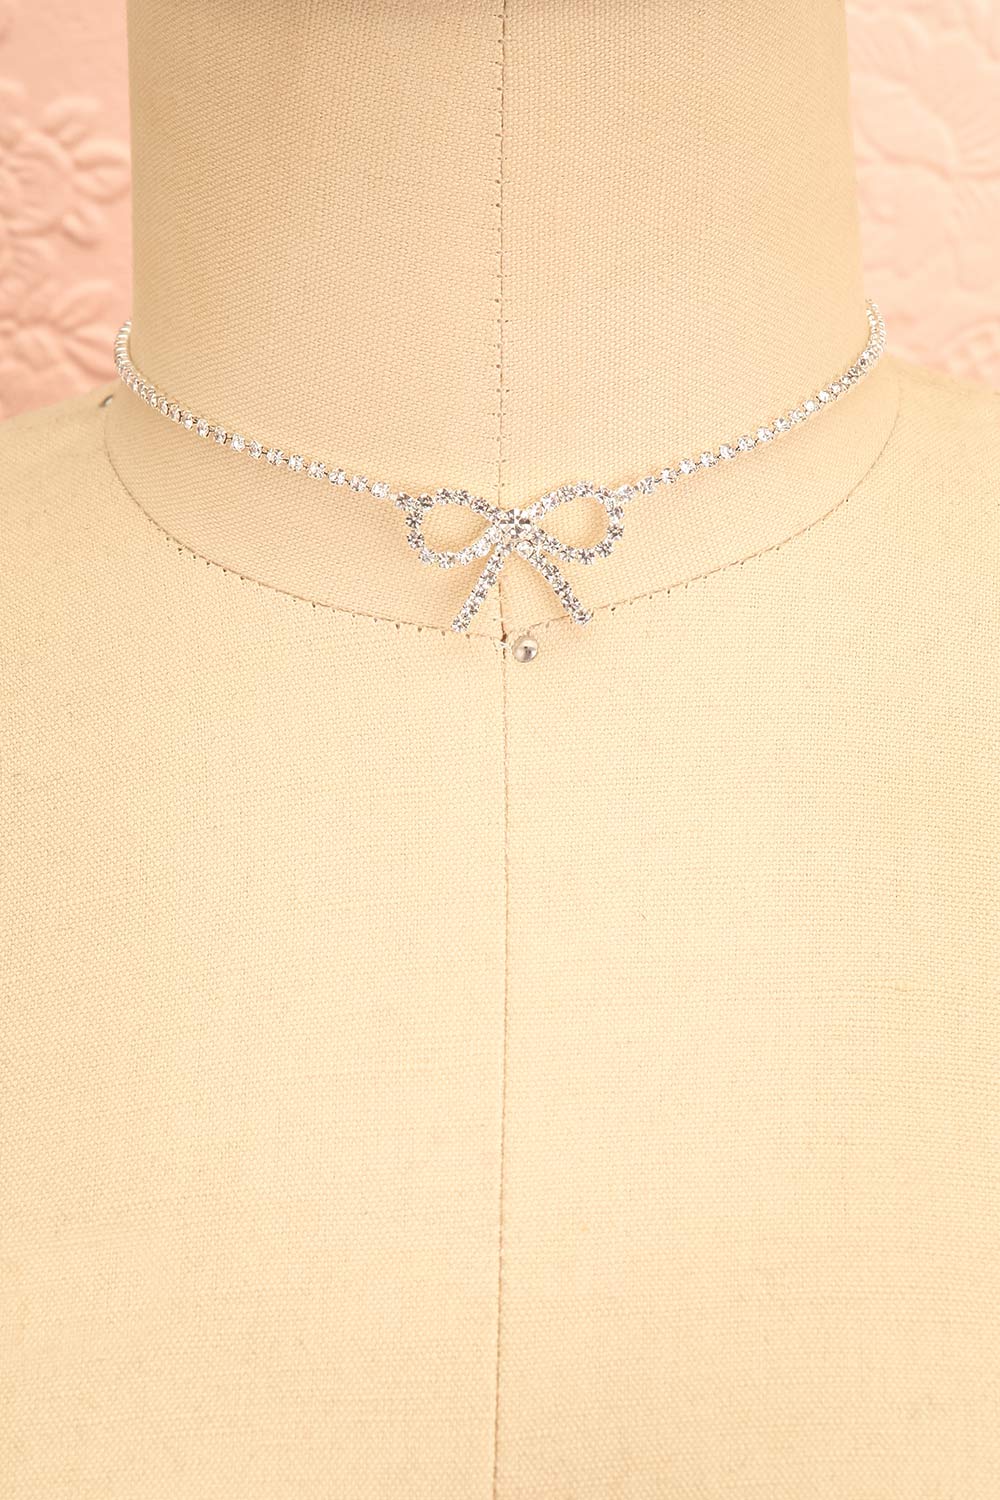 Vintage Delicate Choker Necklace with Crystal Drop Selected by  FernMercantile | Free People